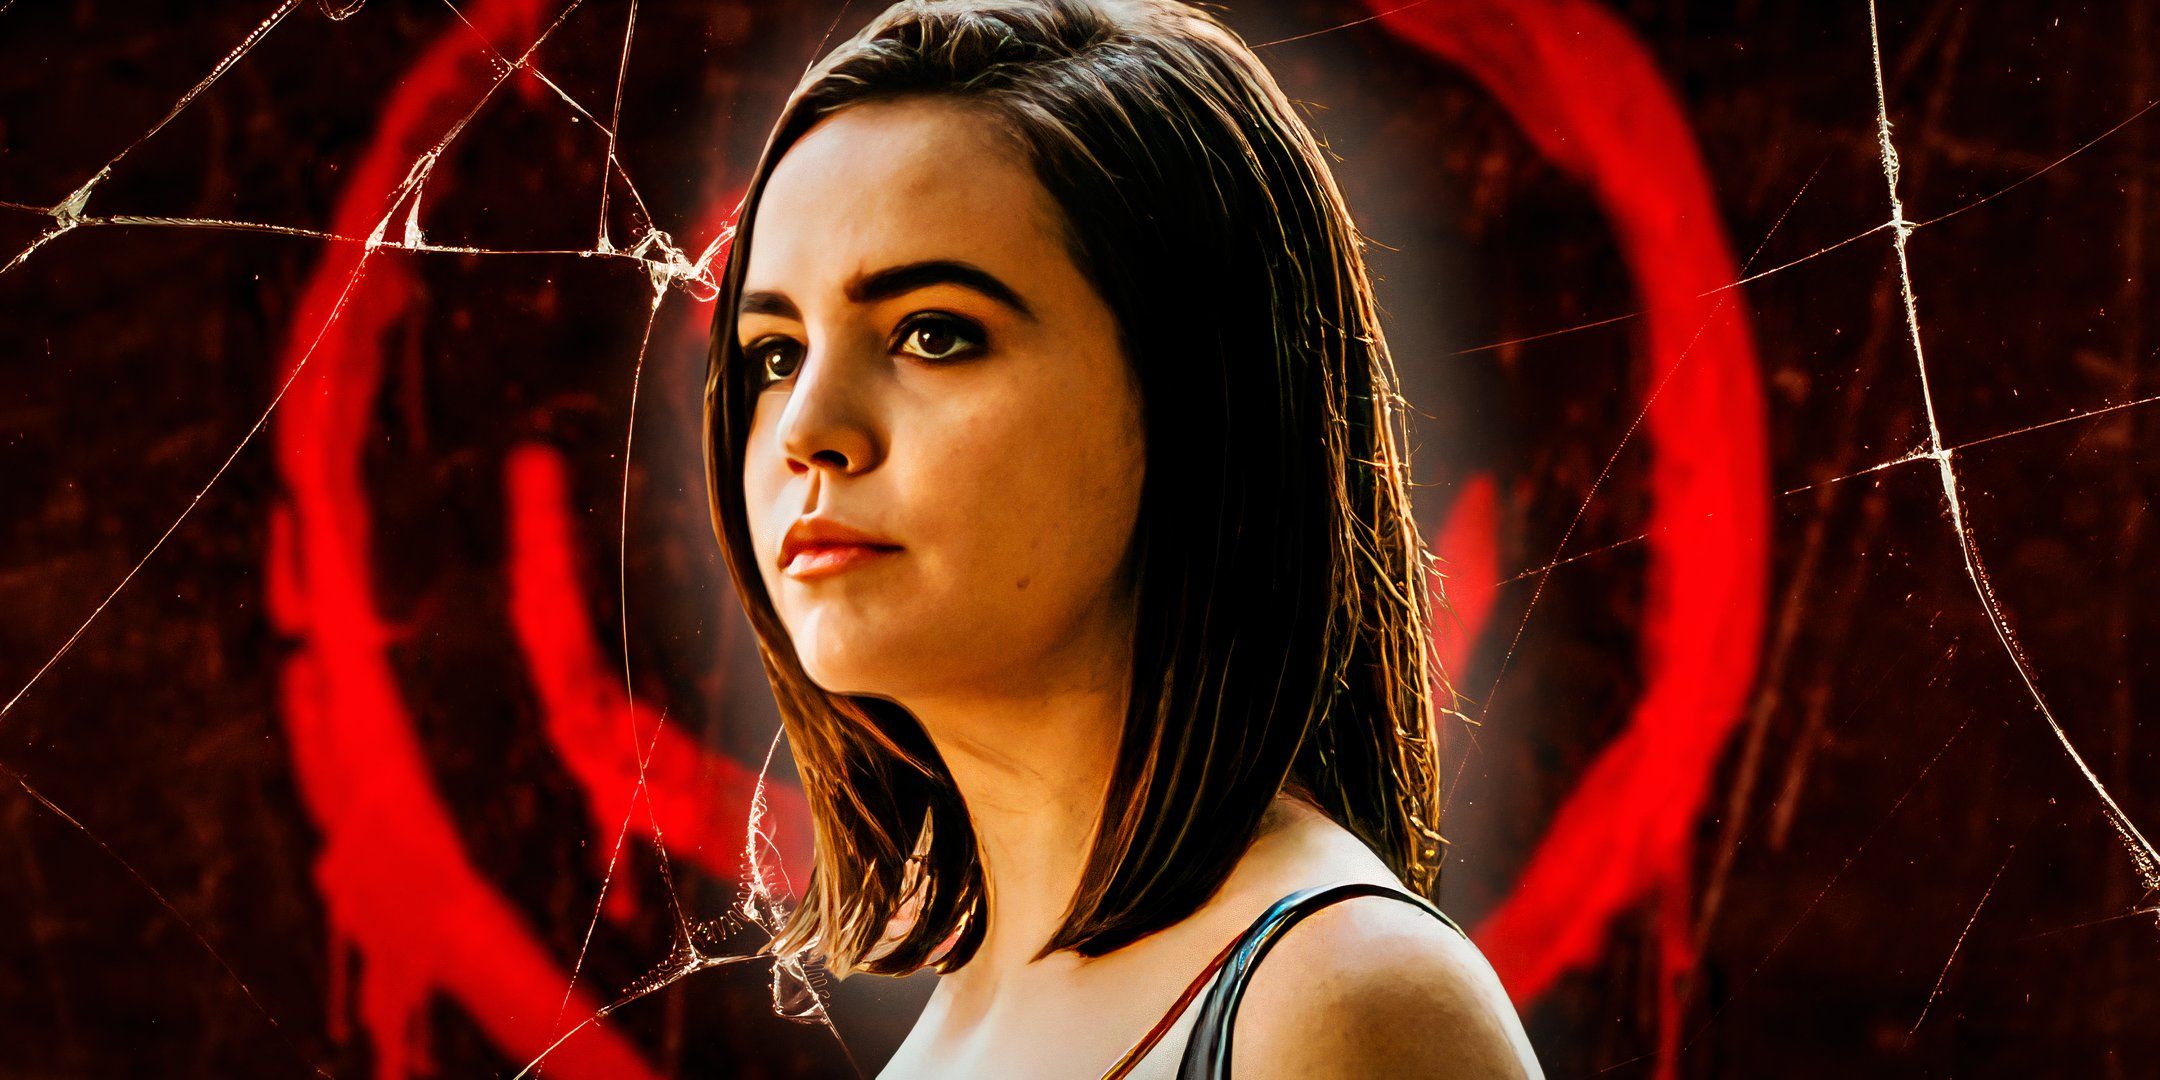 Bailee Madison’s Show With 95% On RT Is A Reminder To Watch This Underrated Horror Movie From 2018